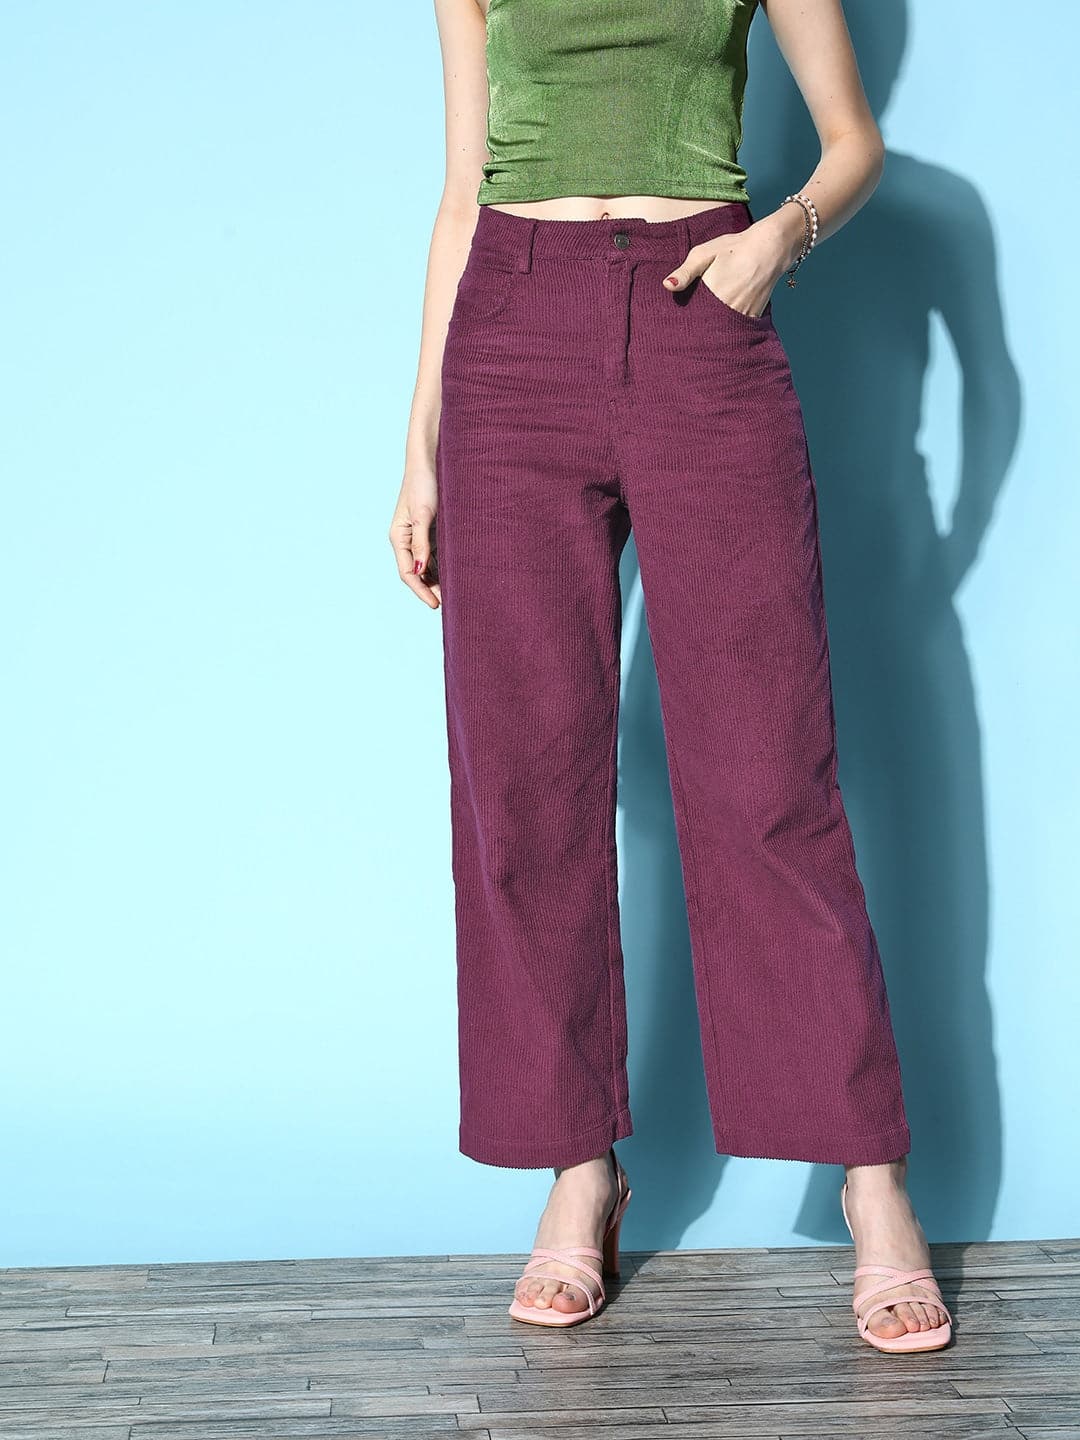 Buy Corduroy Trousers Corduroy Pants Autumn Overalls Large Size Online in  India  Etsy